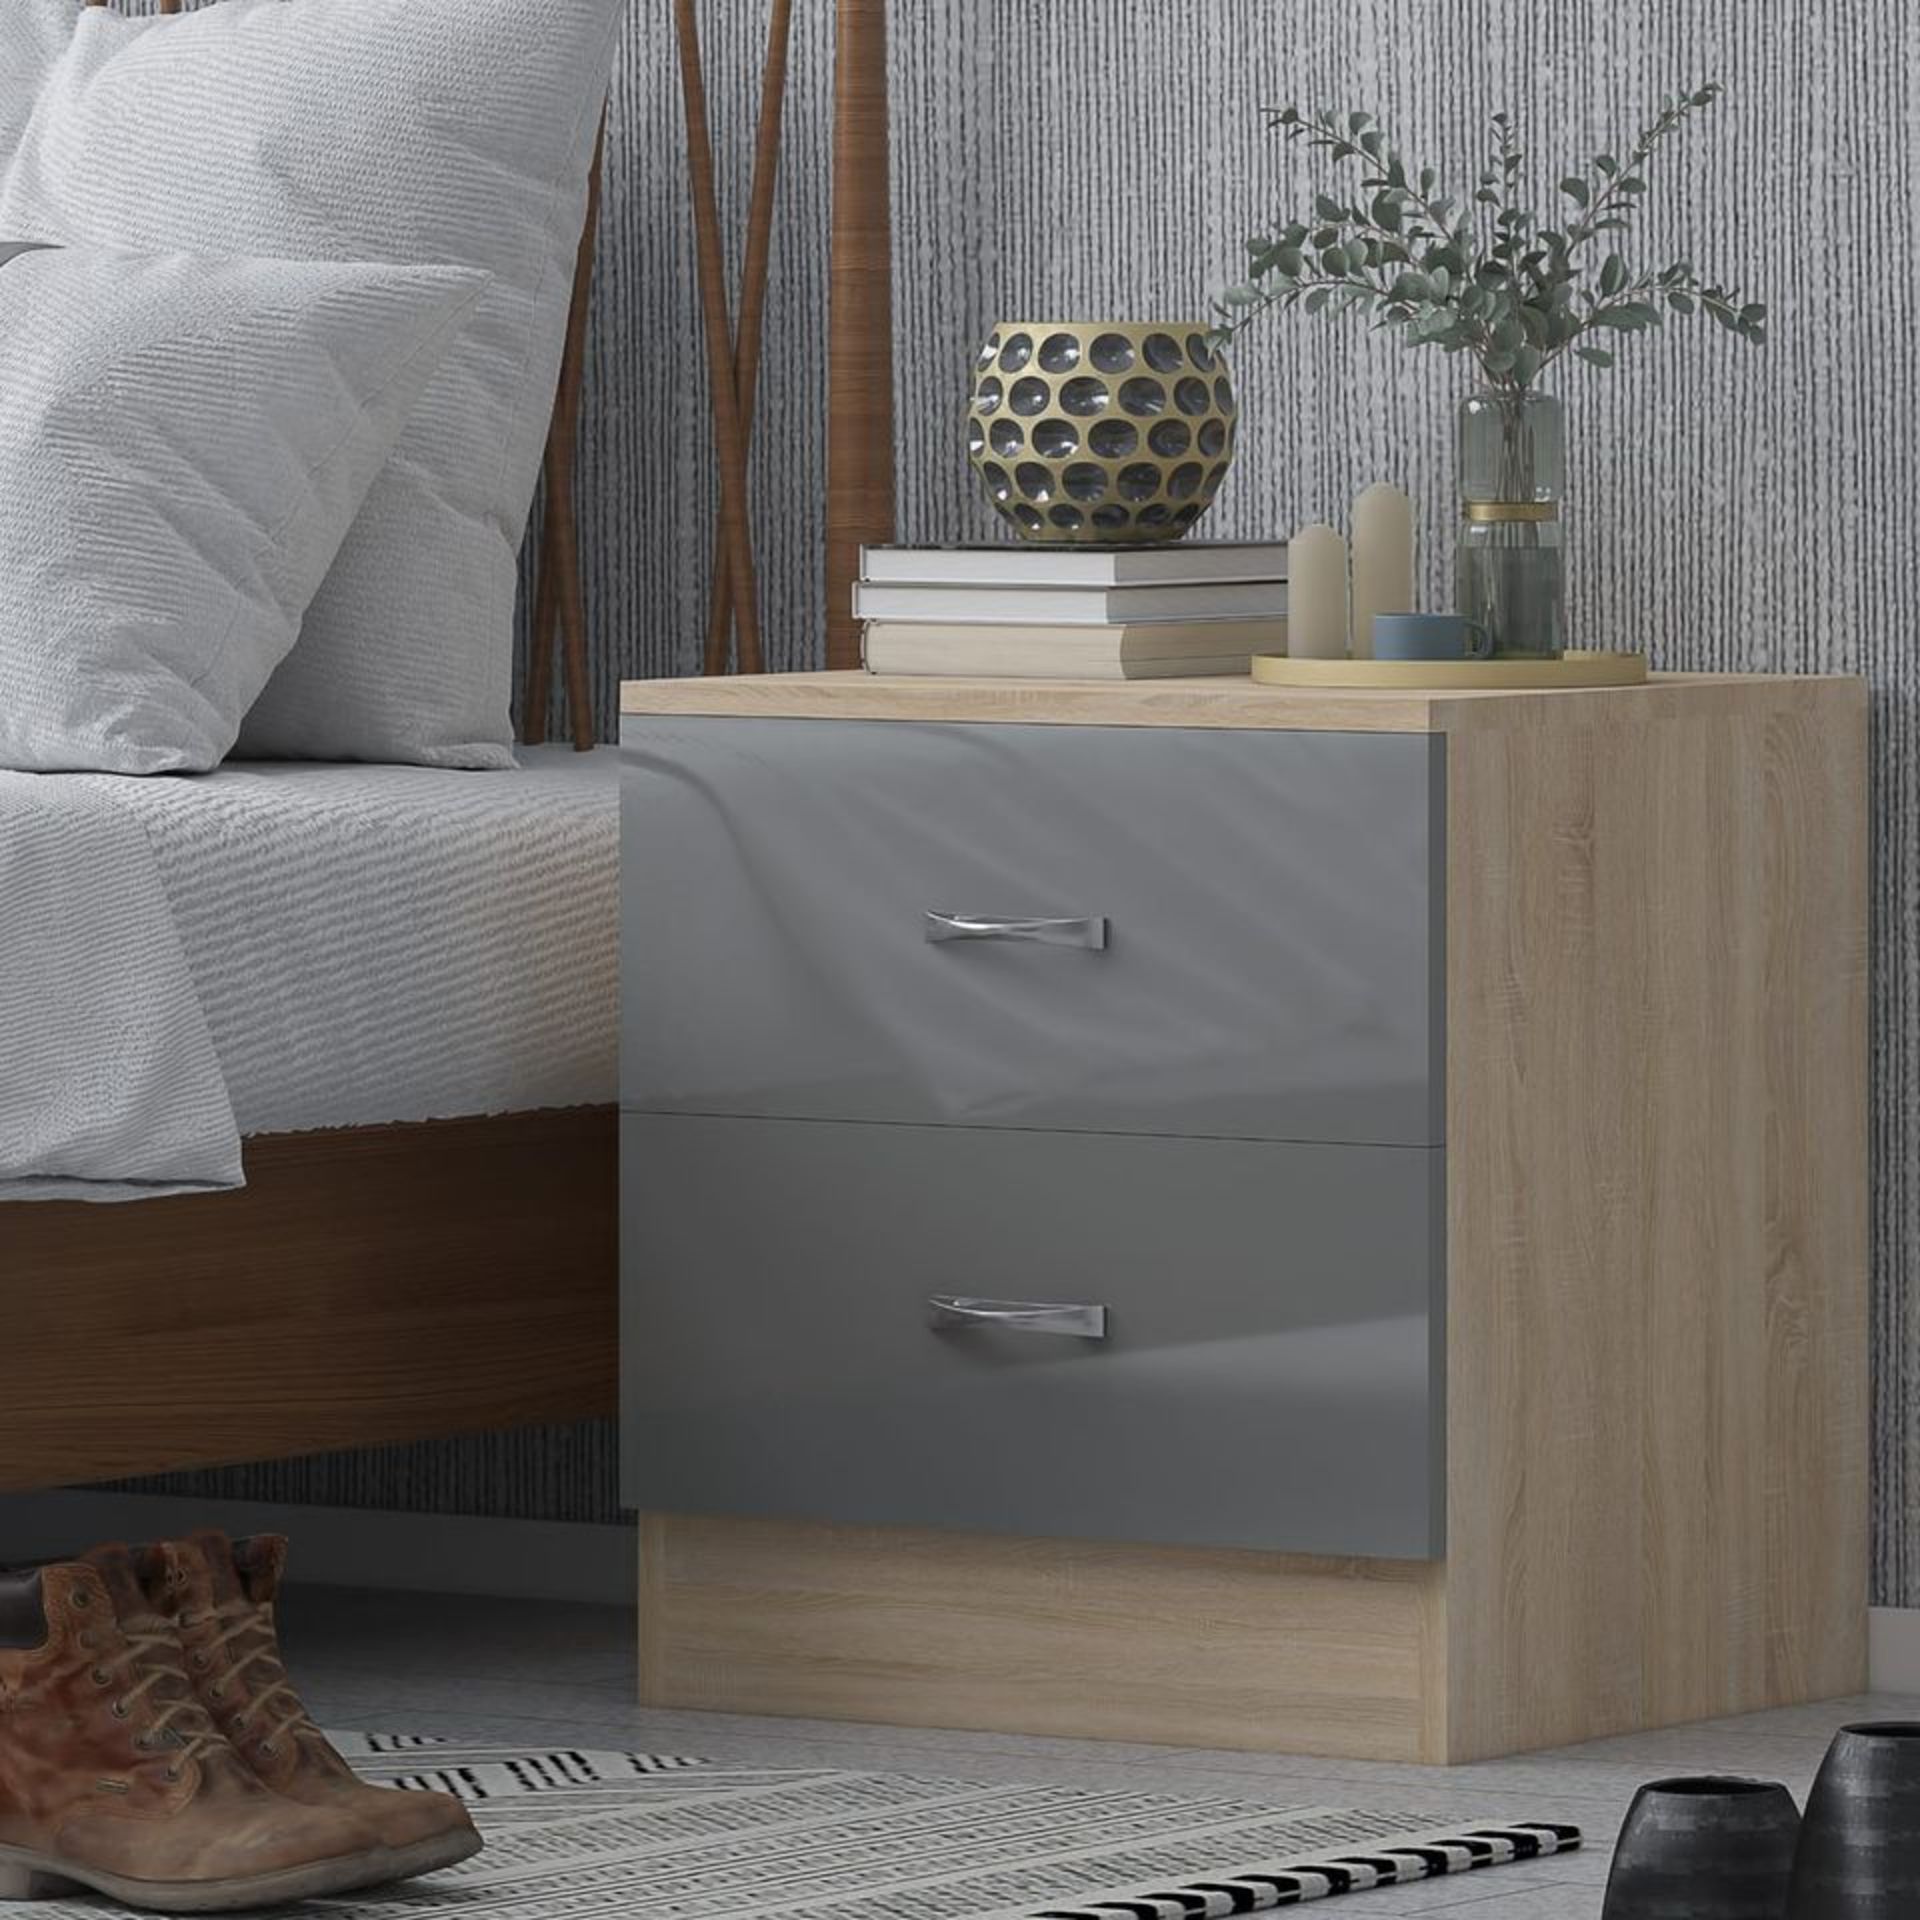 SET OF CHEST AND BEDSIDE - GREY GLOSS ON SONOMA OAK - 4 Drawer Chest - The 4 drawer chest is an - Image 2 of 5